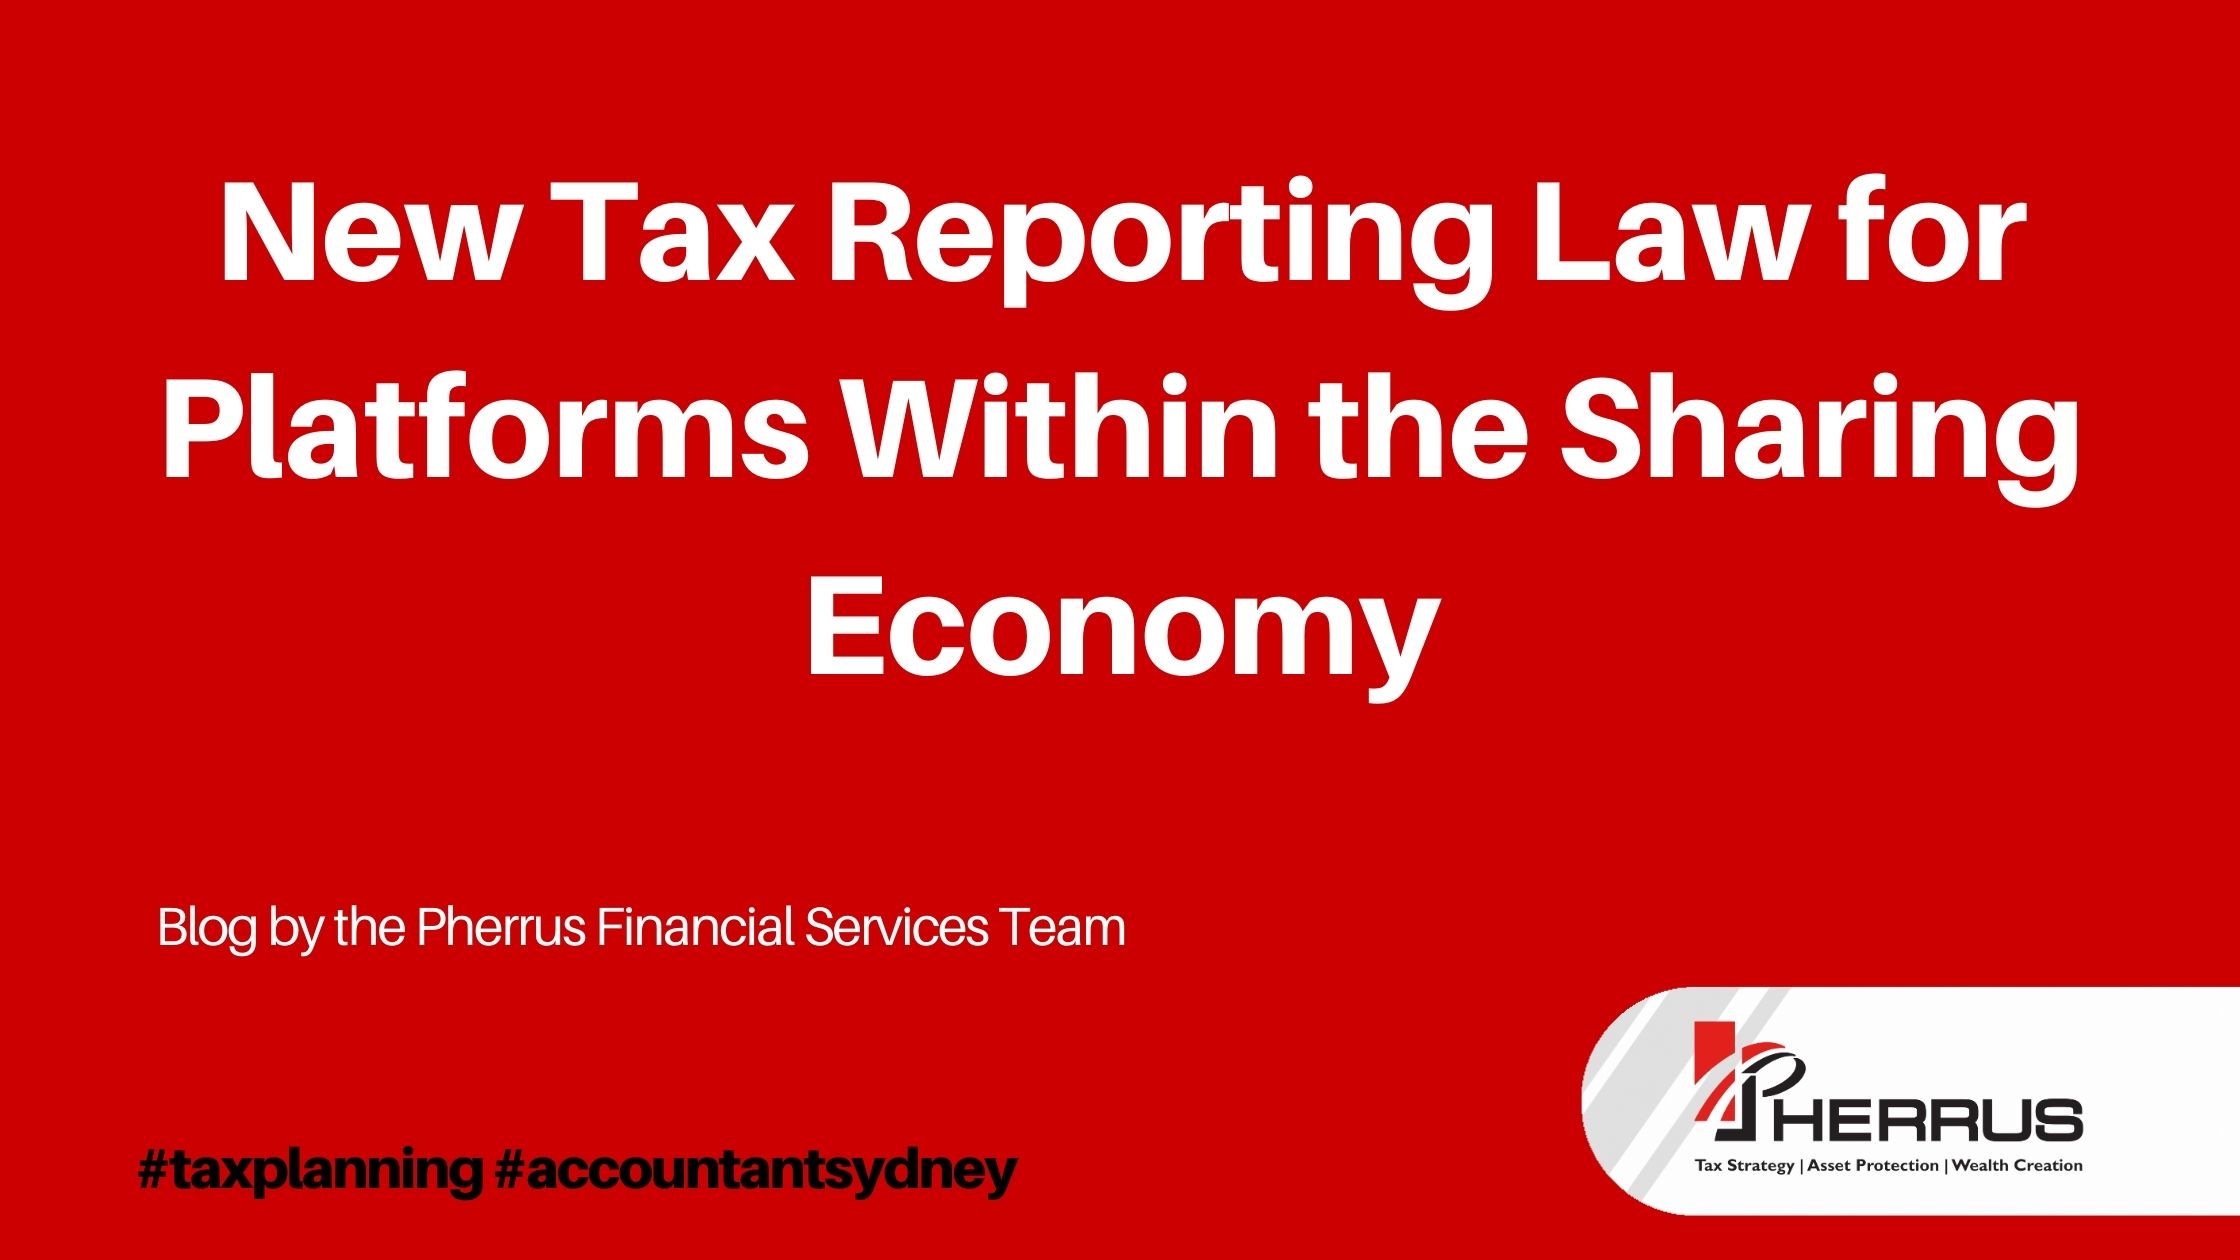 New Tax Reporting Law for Platforms Within the Sharing Economy